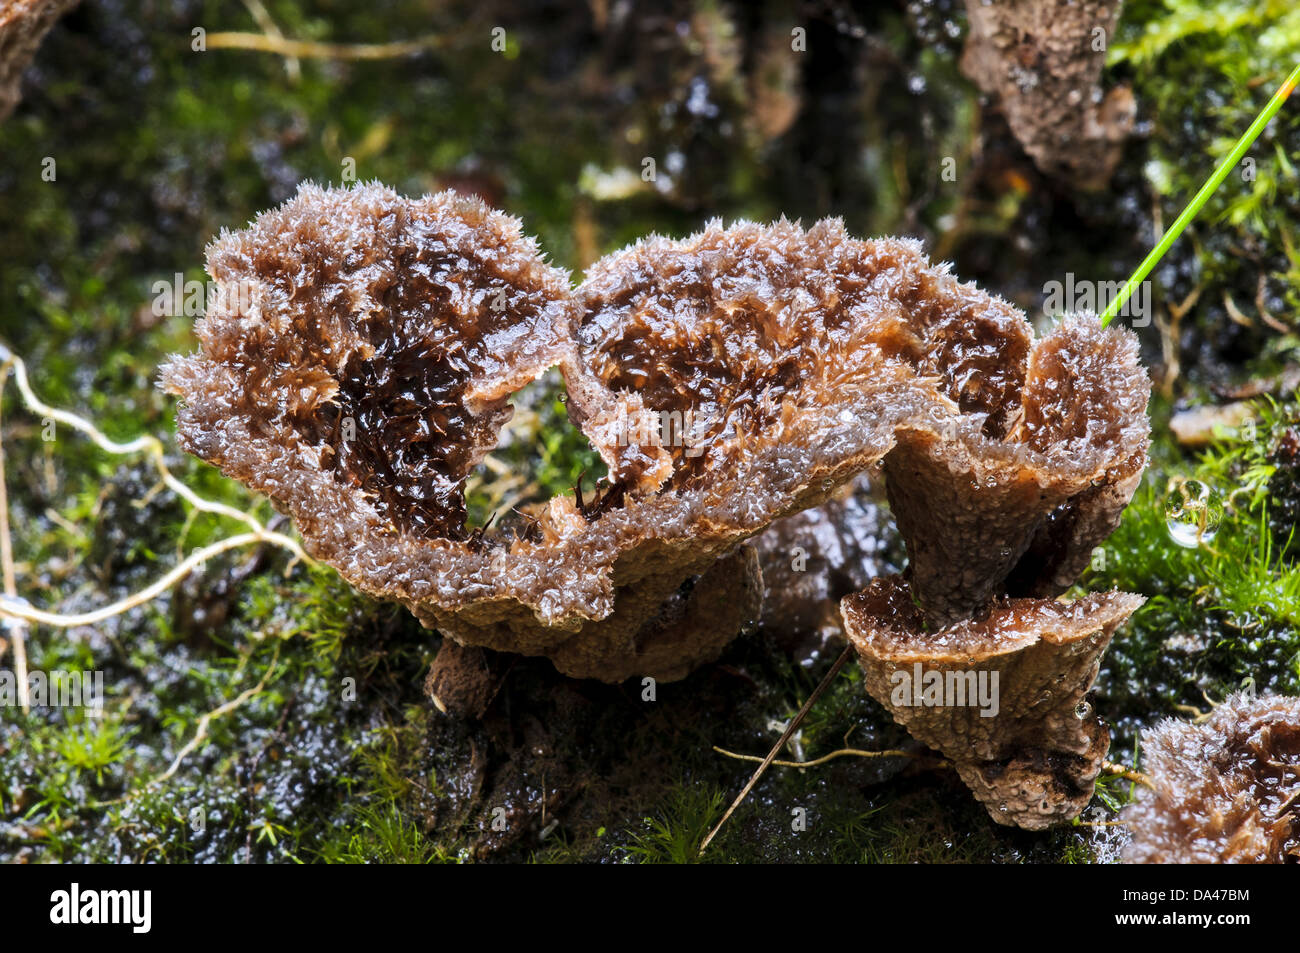 Earth Fan (Thelephora terrestris) fruiting bodies, Clumber Park, Nottinghamshire, England, October Stock Photo